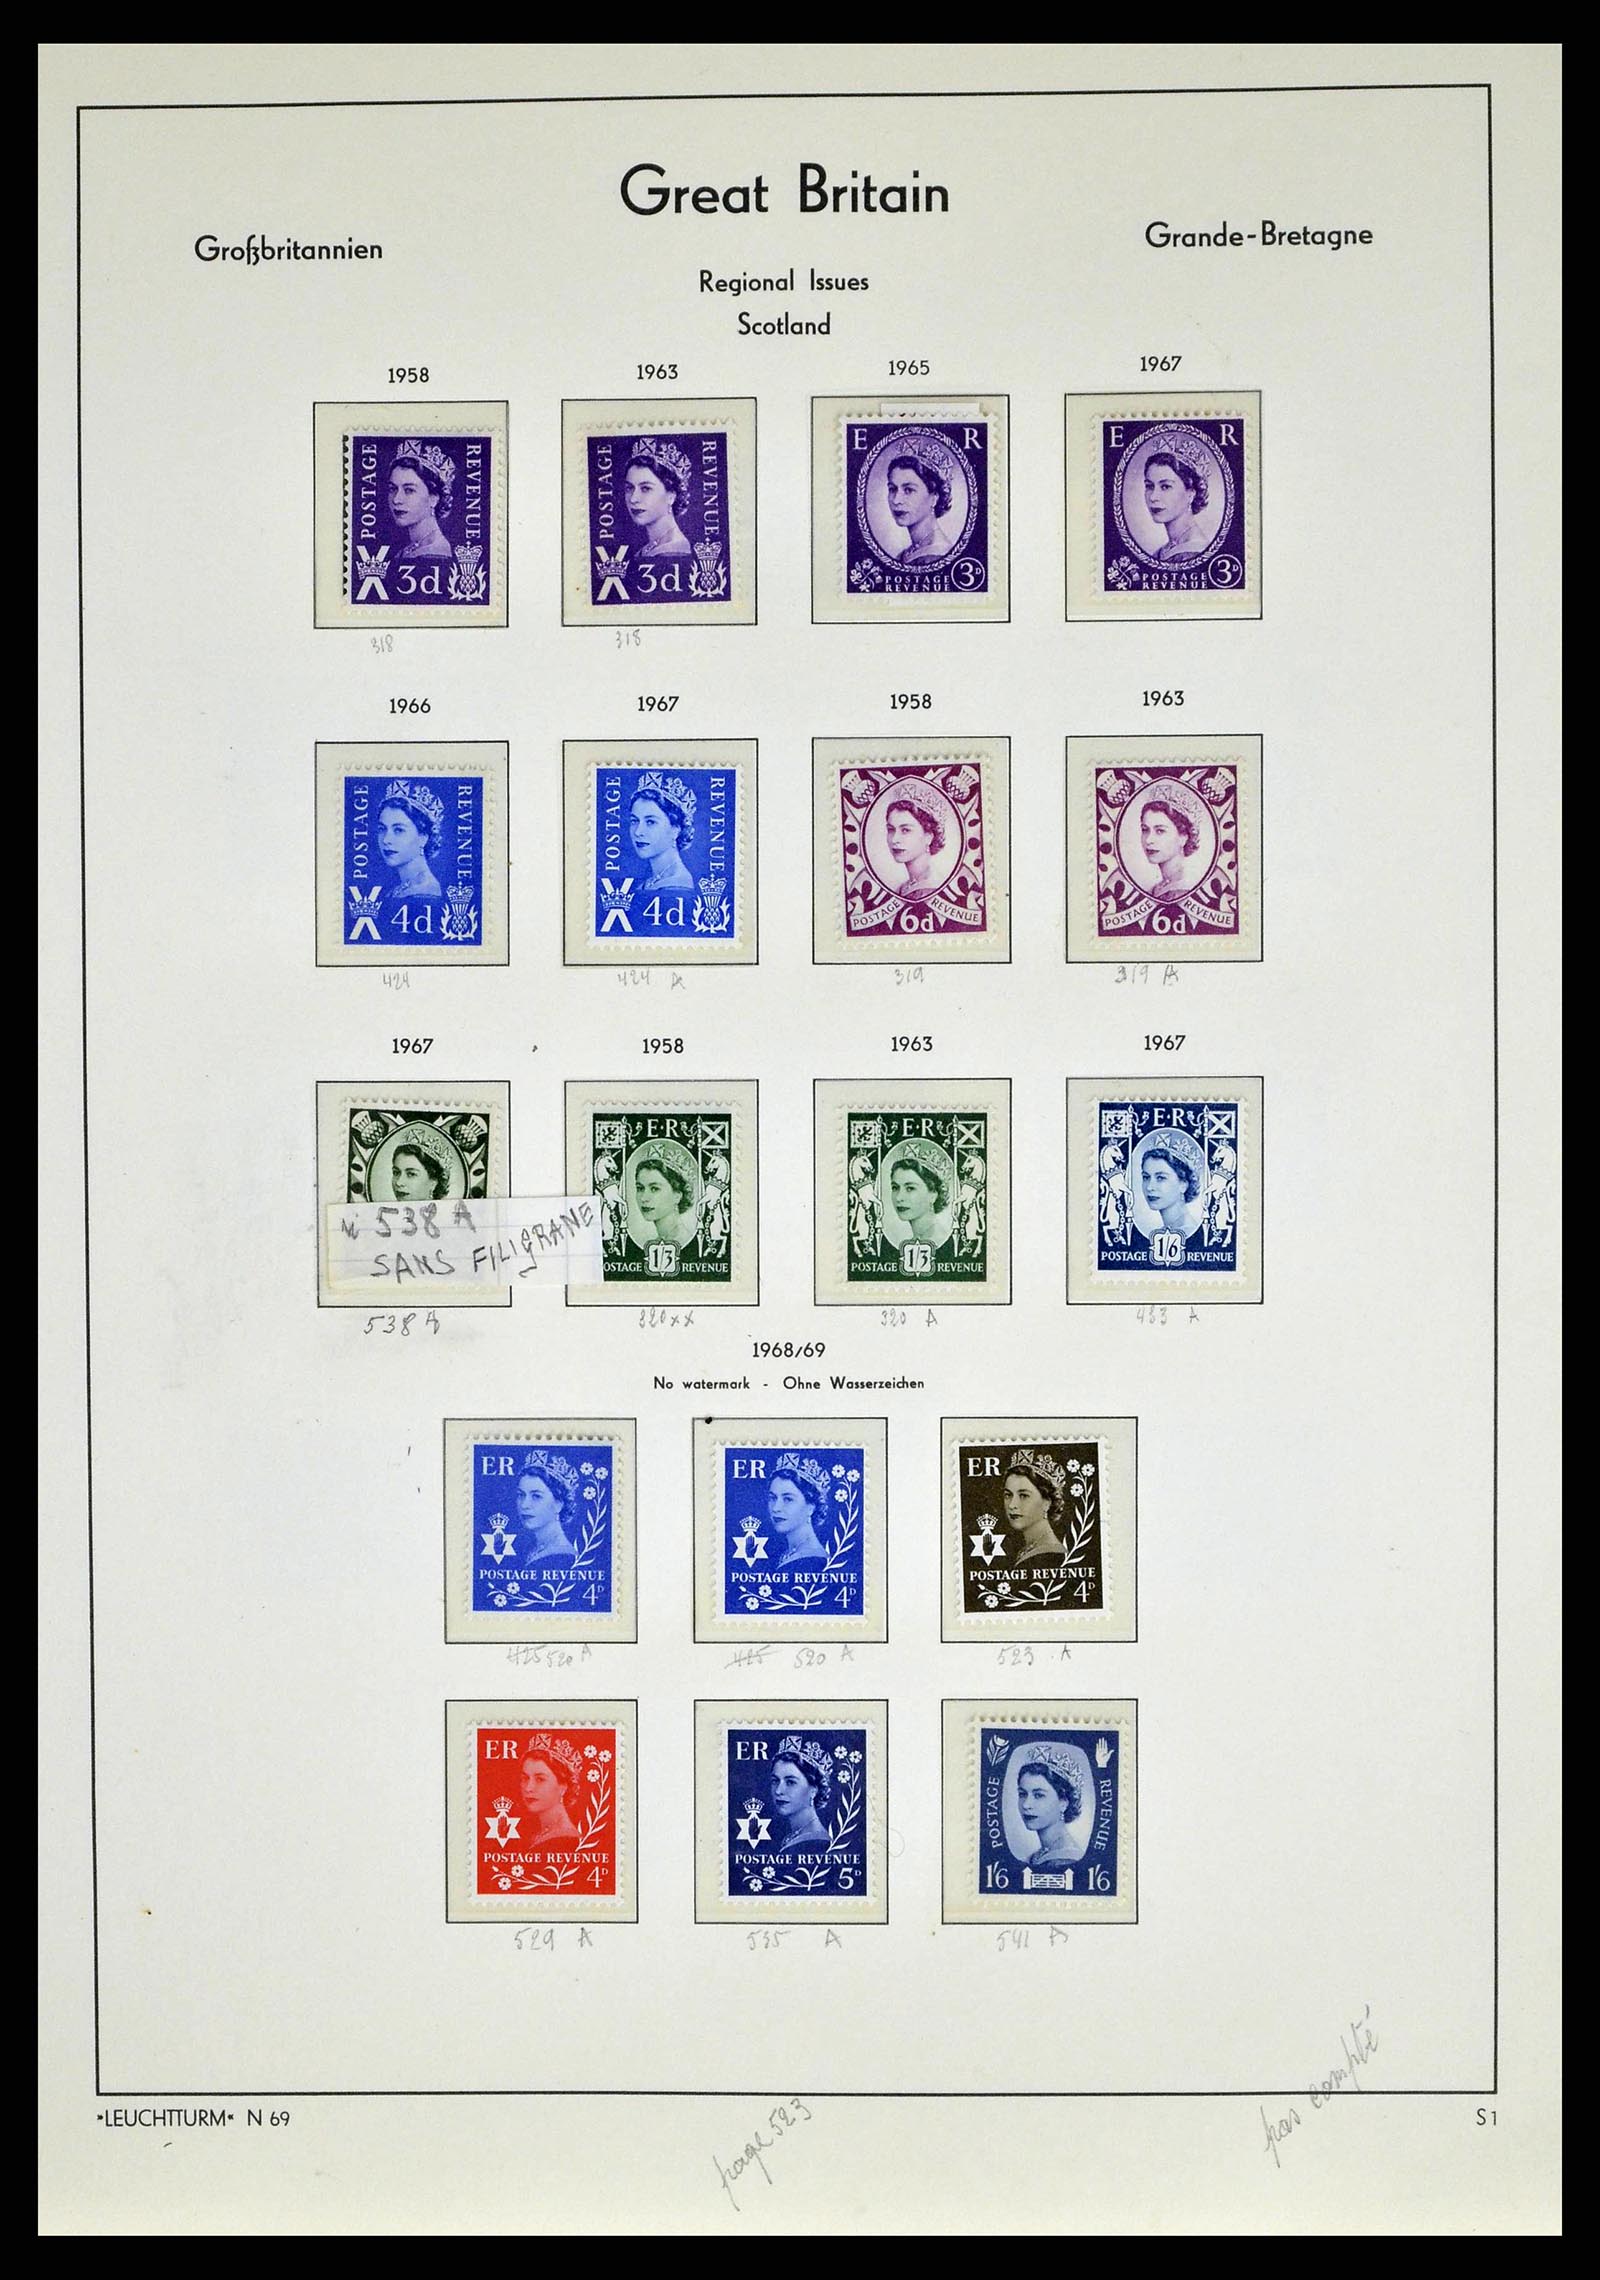 38649 0127 - Stamp collection 38649 Great Britain 1840-1971.